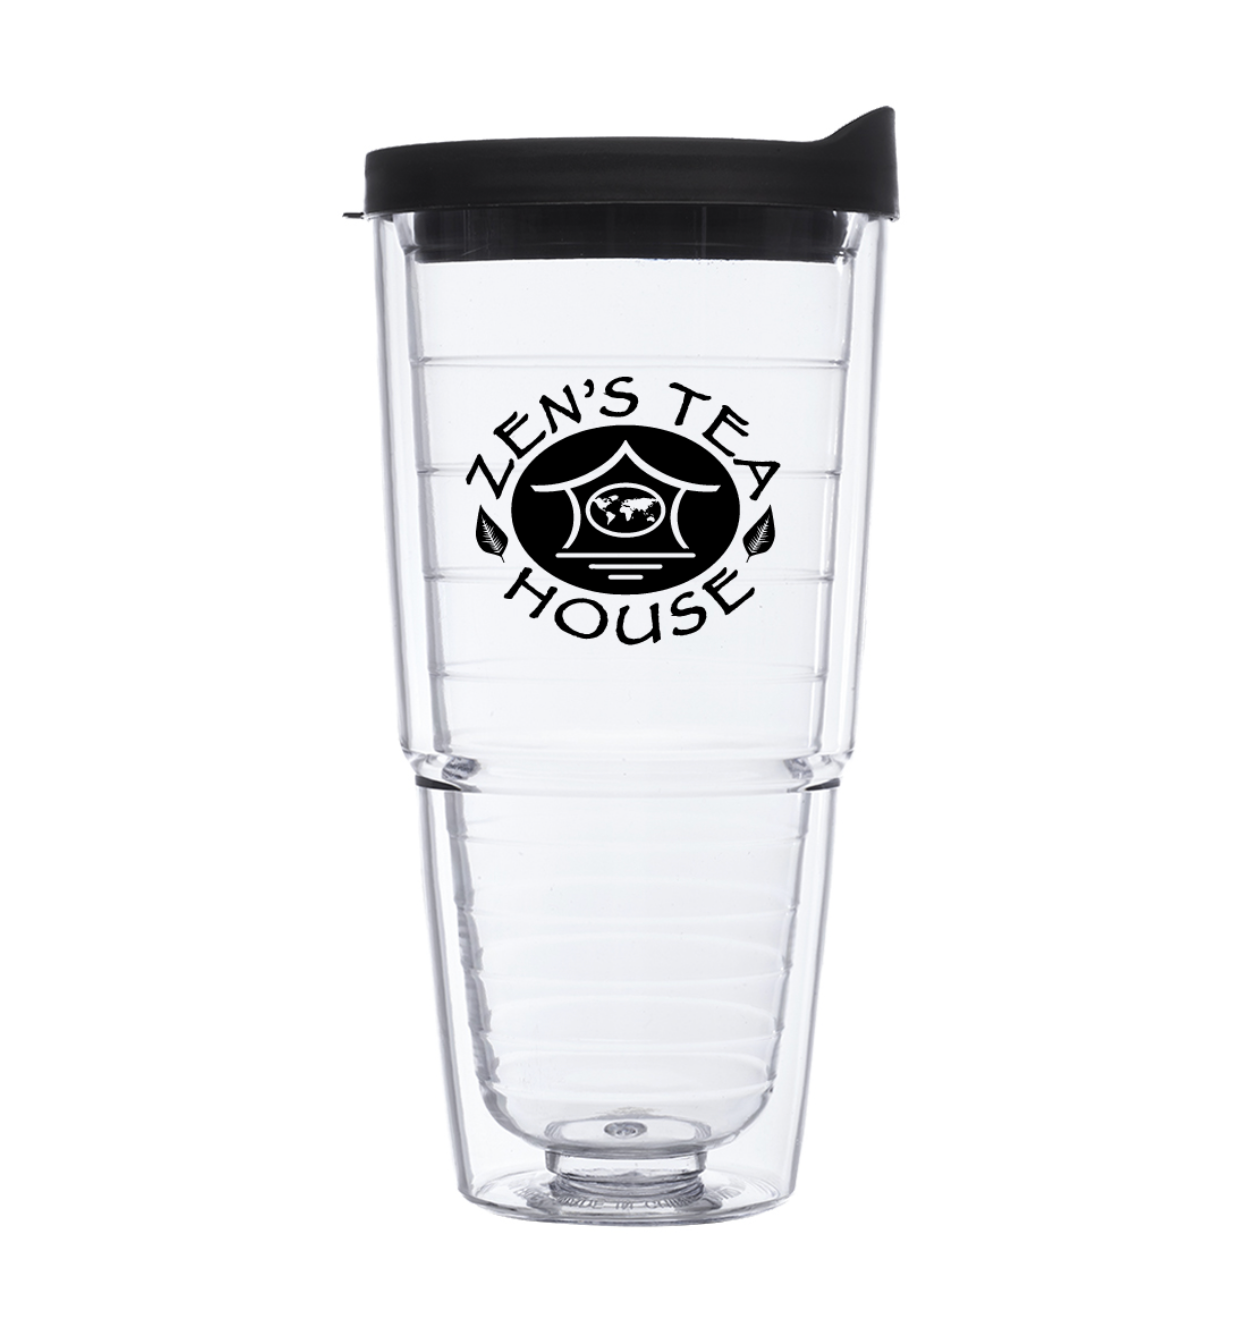 Zen's 24 oz. Double Wall Solid Clear Orbit Acrylic Tumbler with logo